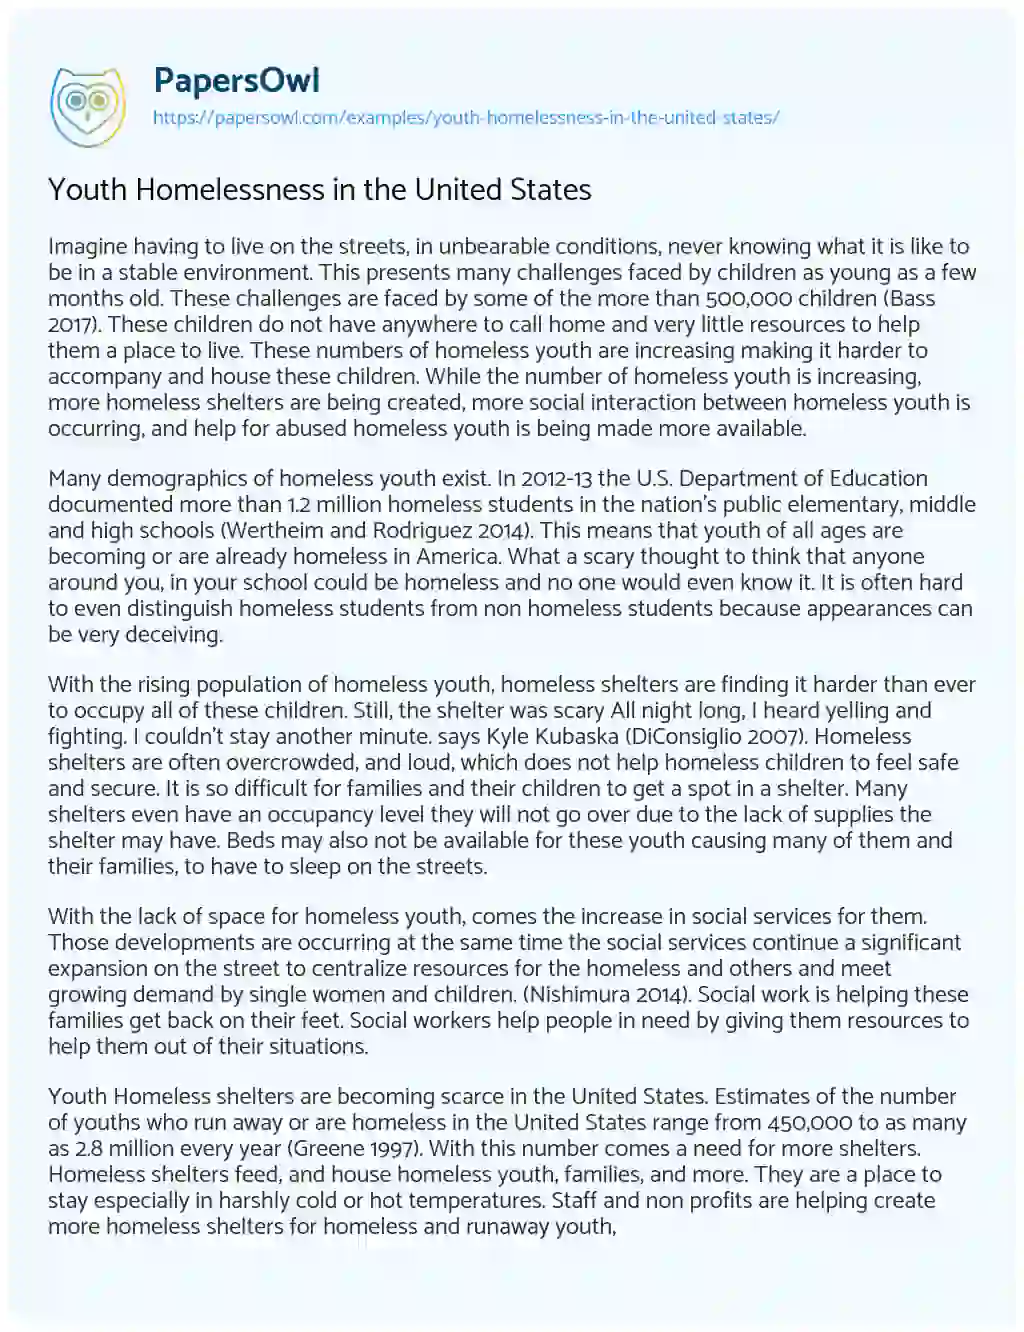 Essay on Youth Homelessness in the United States